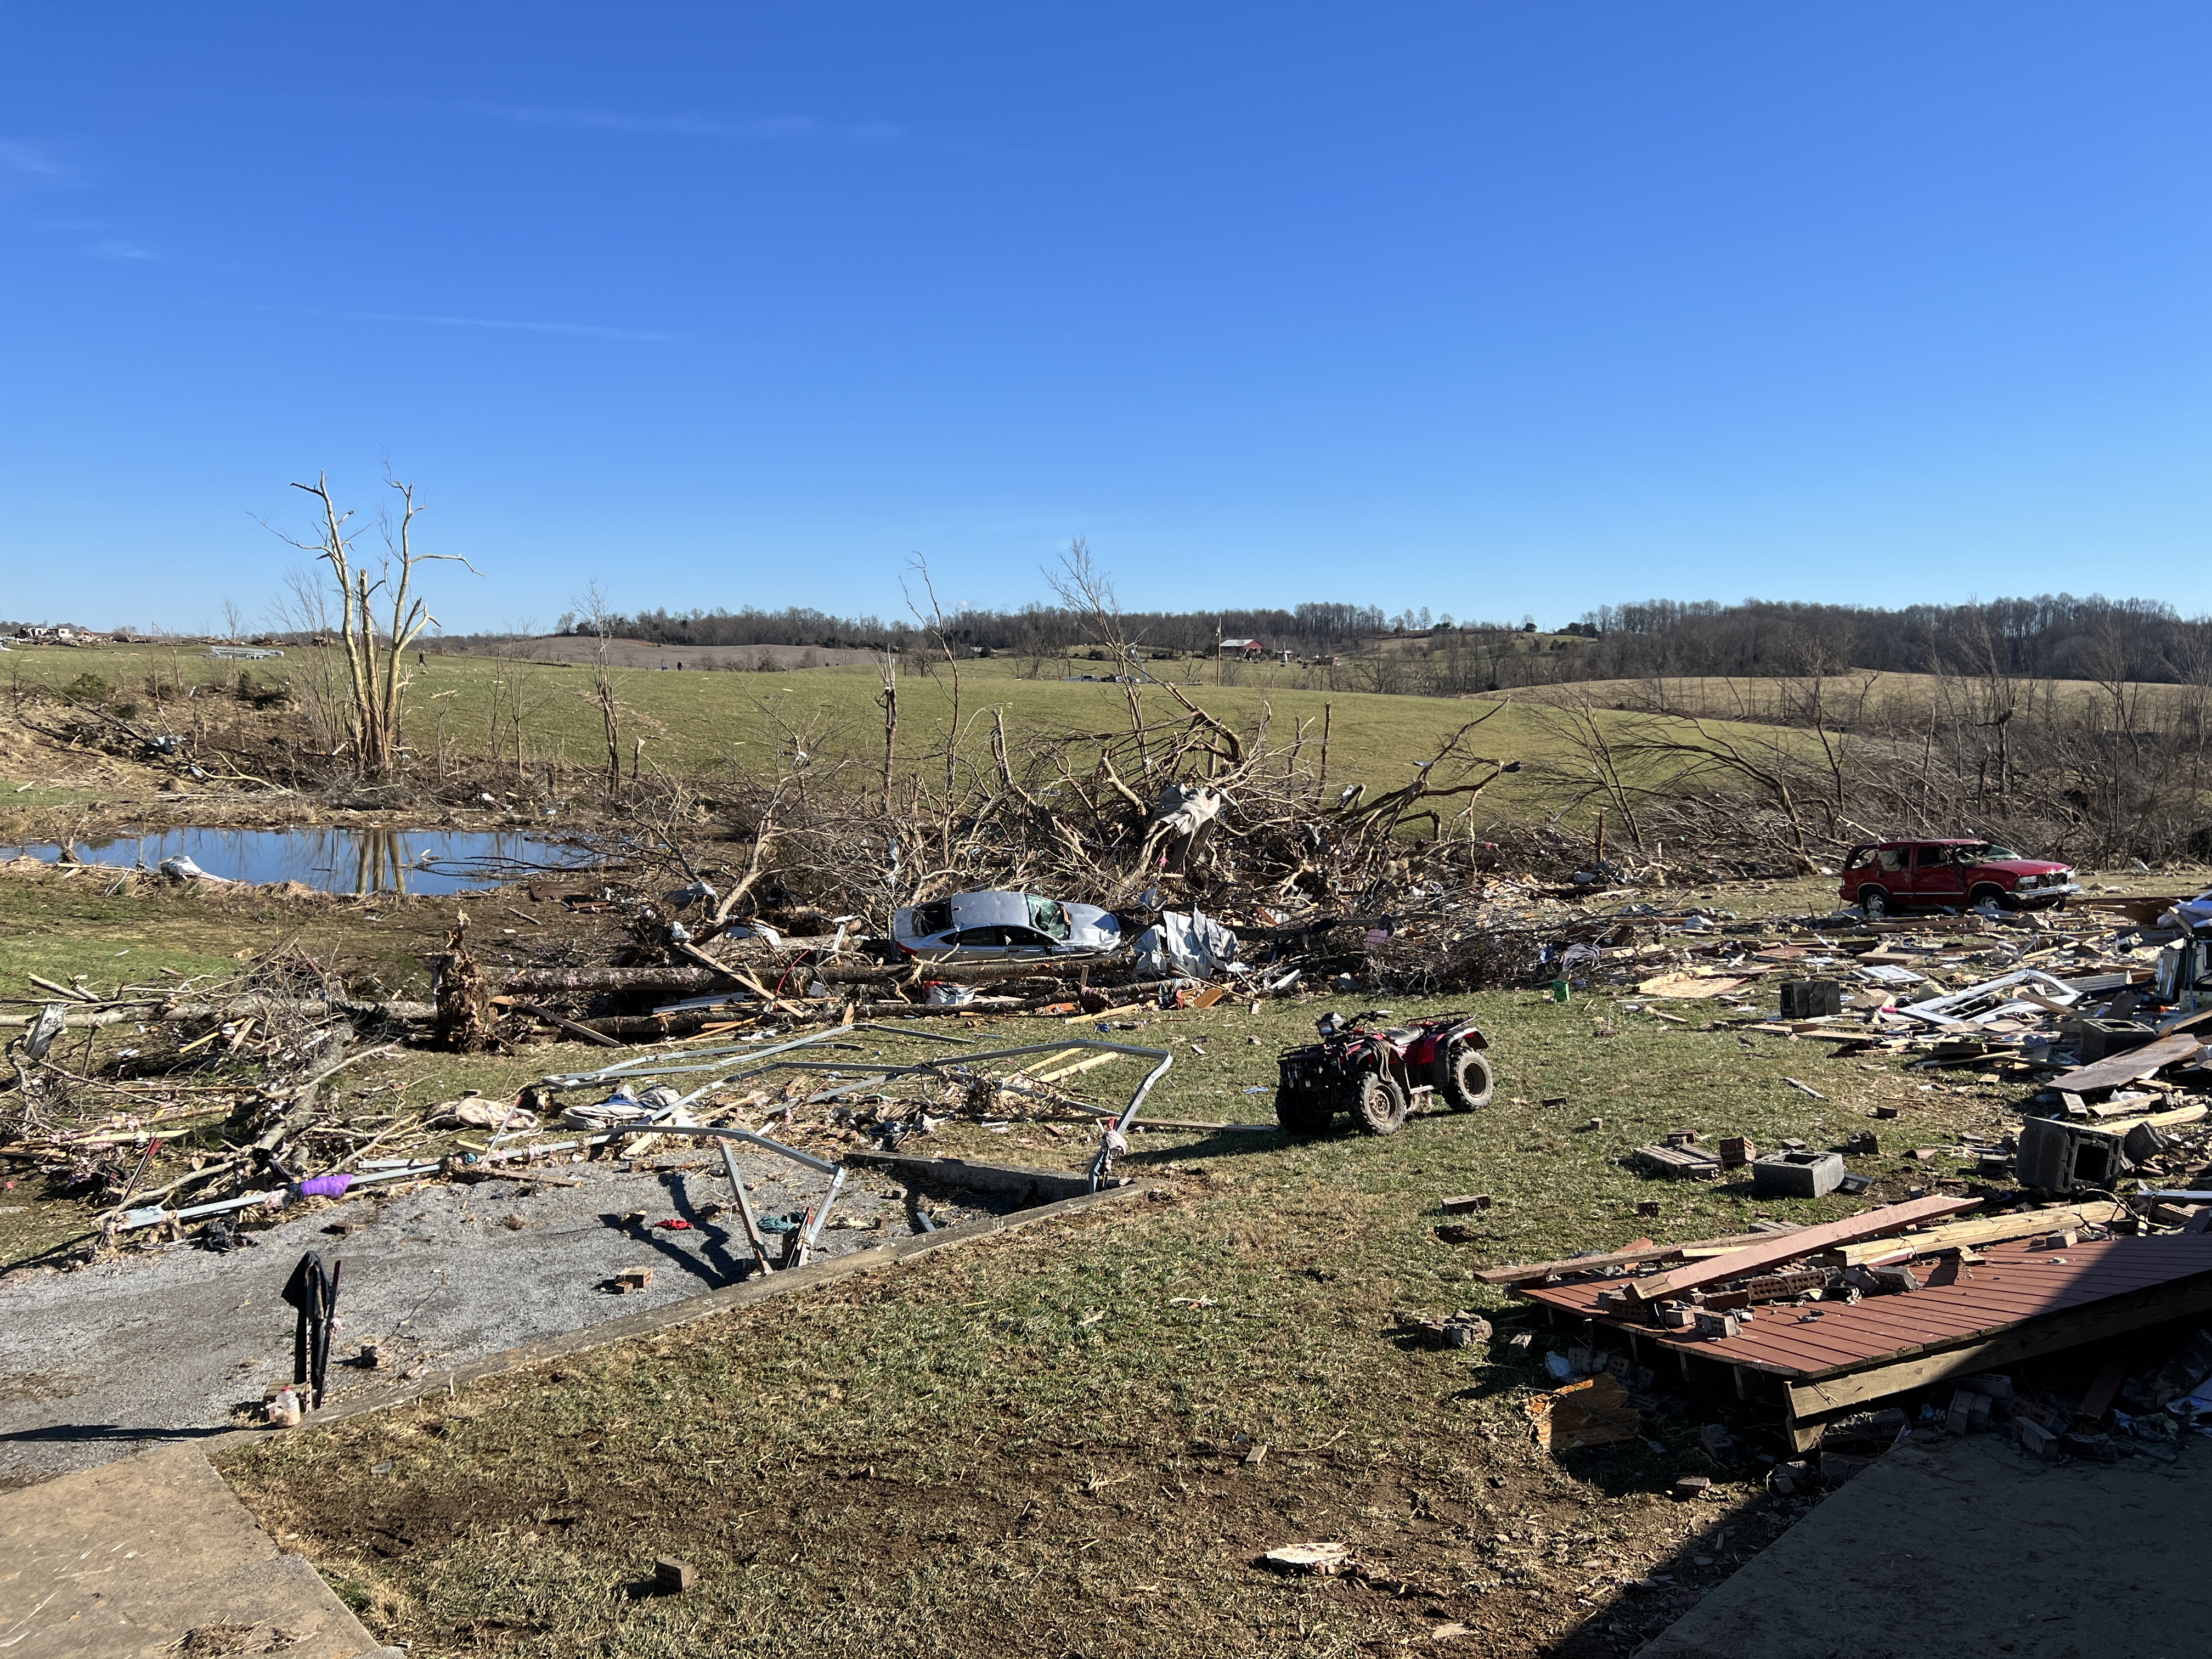 The remnants of a completely destroyed home strewn into a pond and nearby trees along with two destroyed vehicles near Saloma, Kentucky.